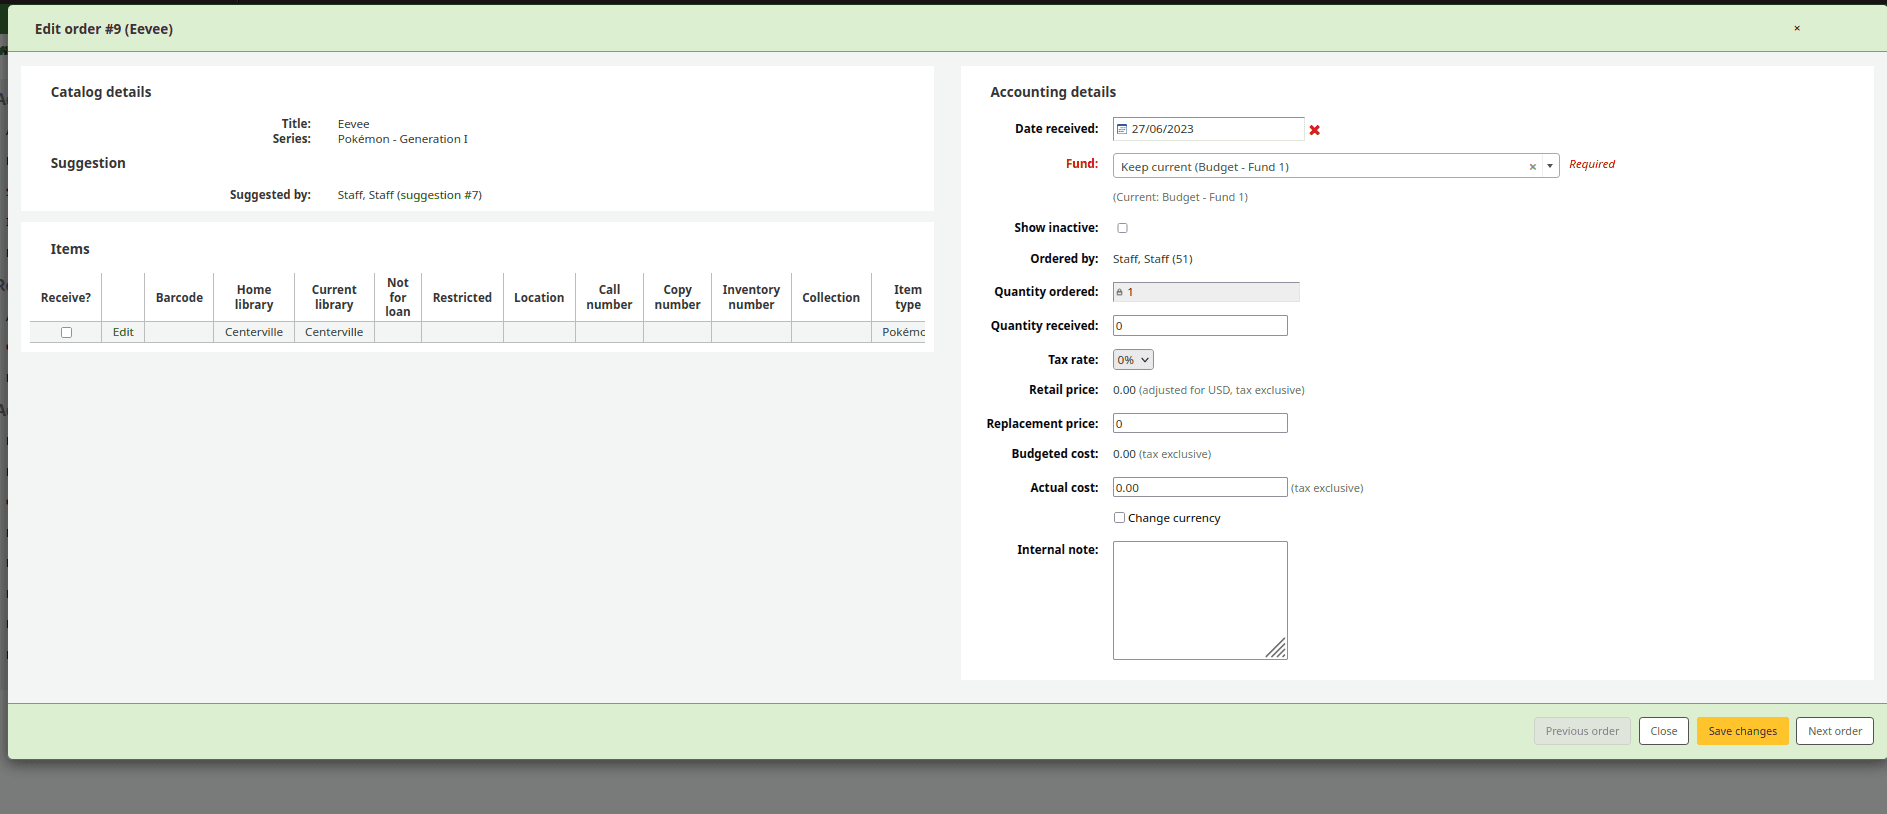 ‘Previous order’ and ‘Next order’ buttons show in the bottom-right of the screen when editing received orders